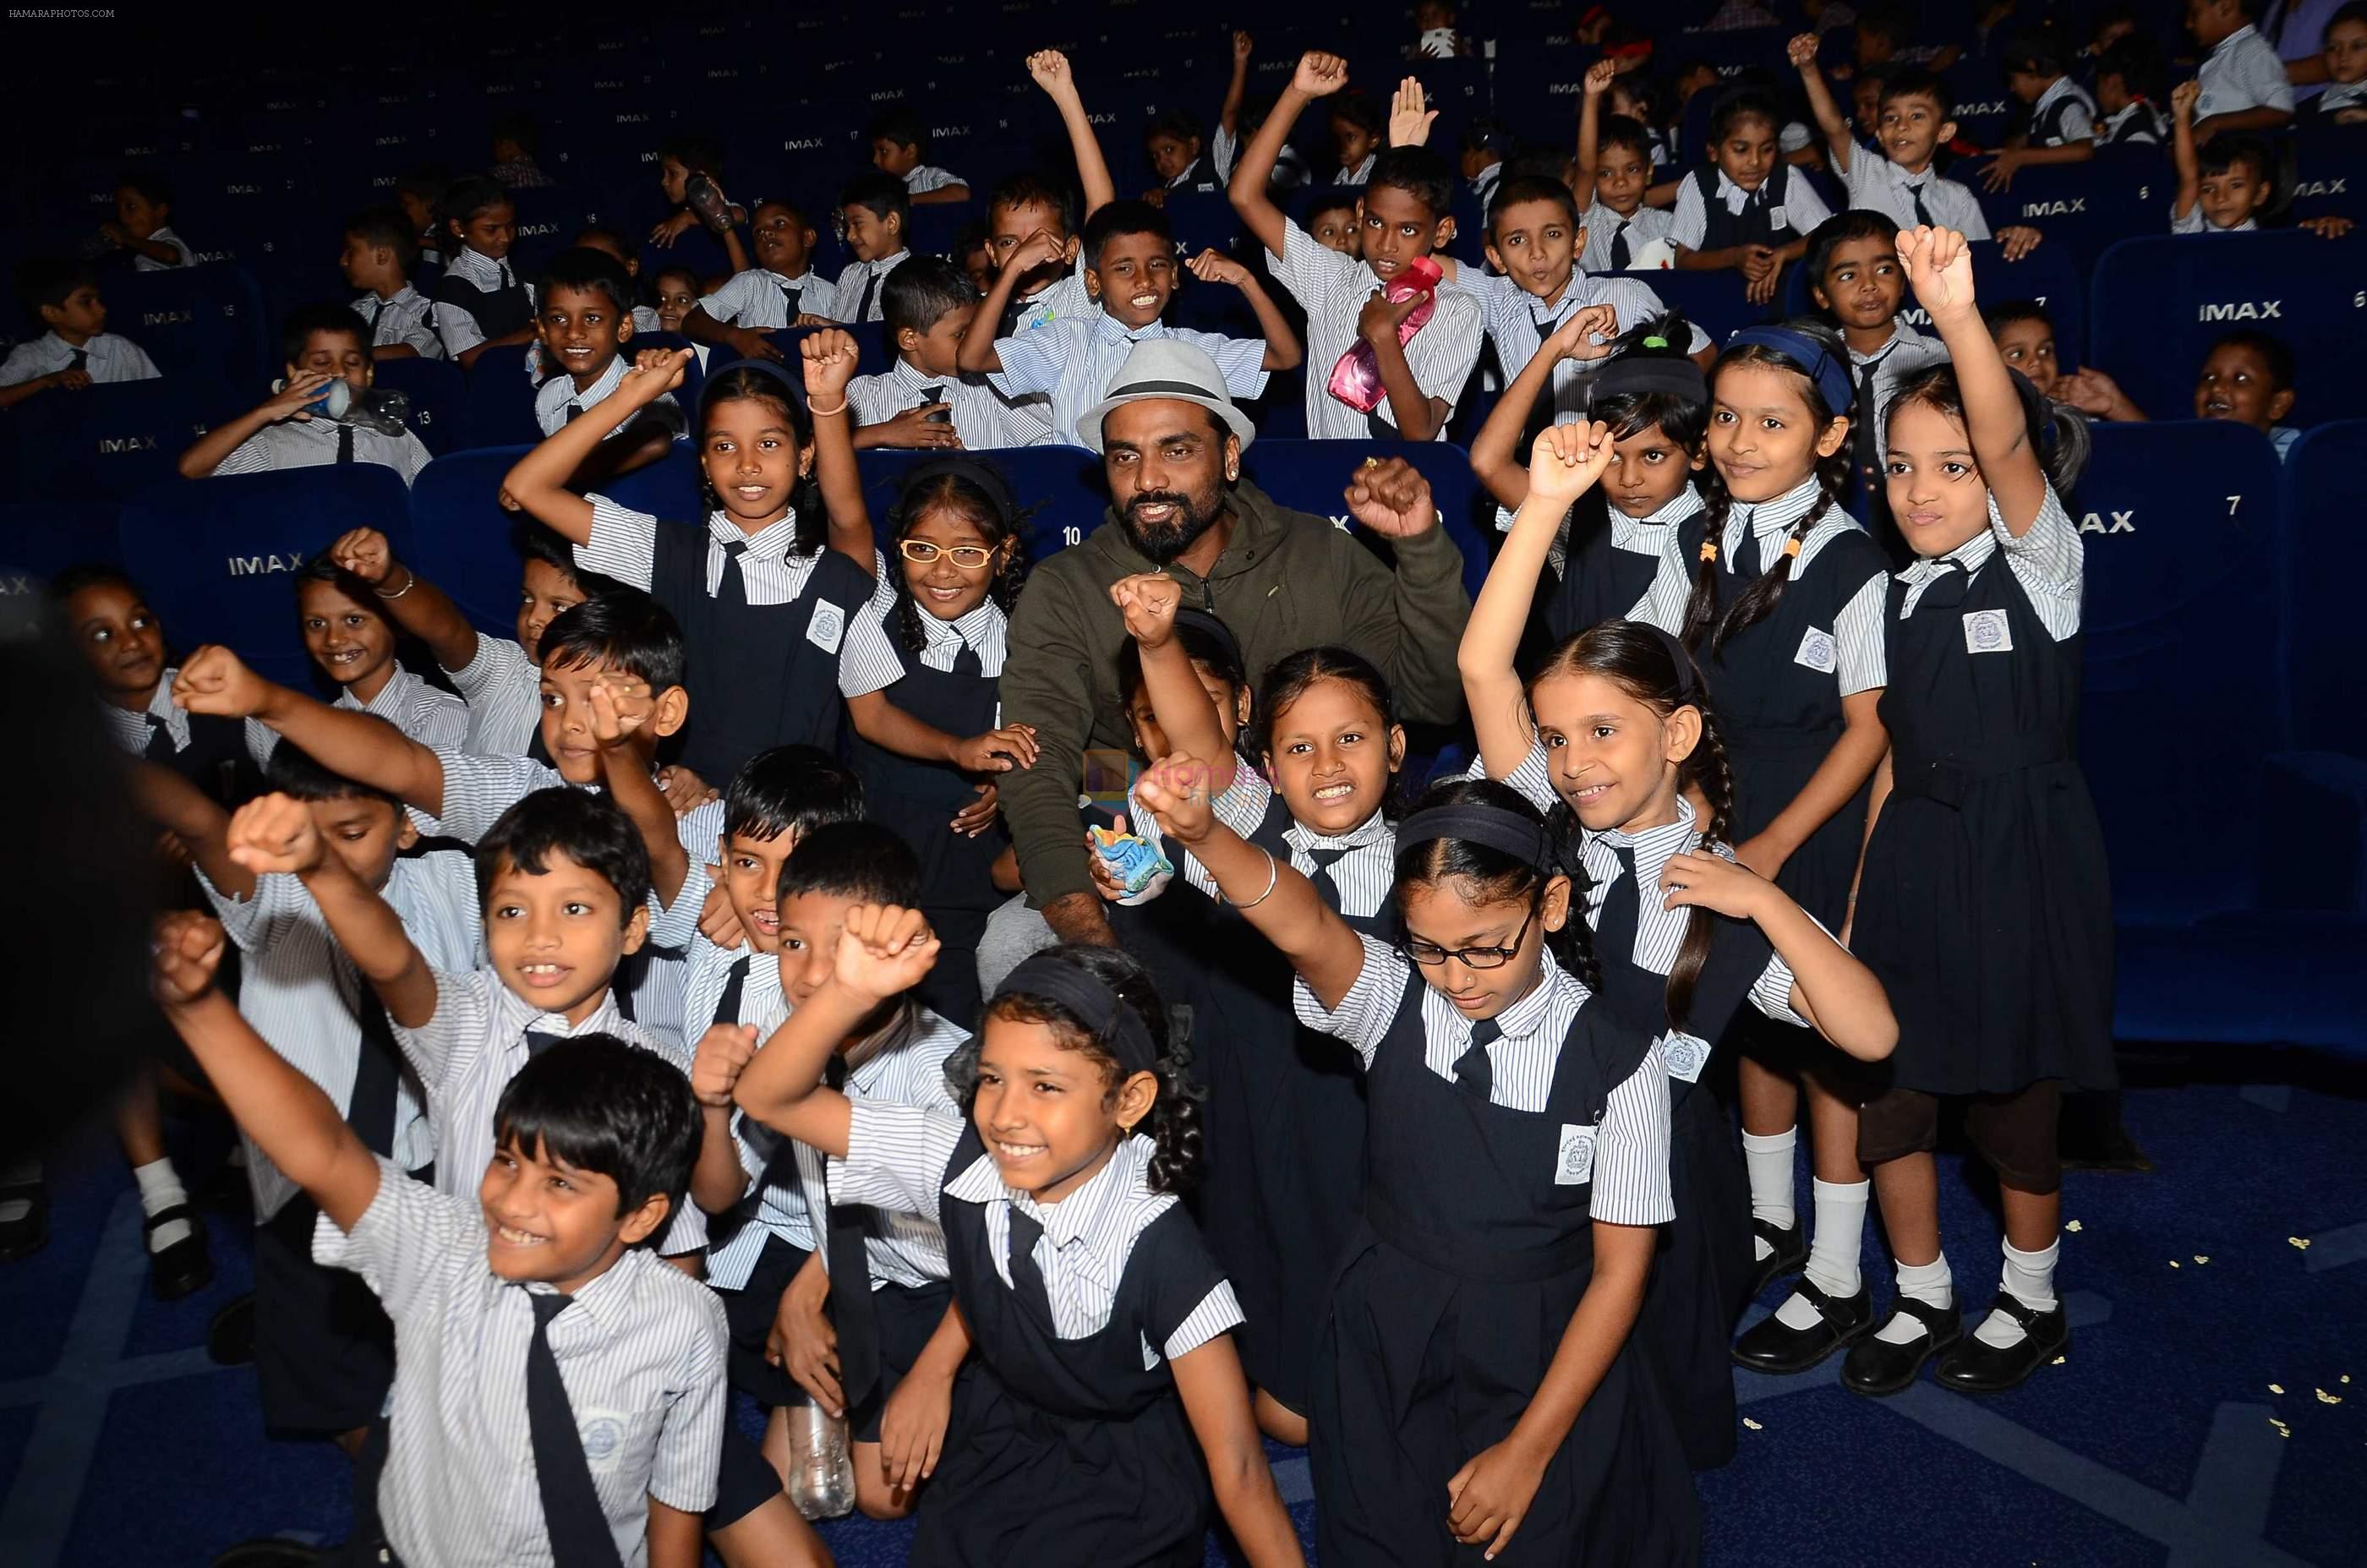 Remo D souza with kids for The flying jatt screening on 30th Aug 2016